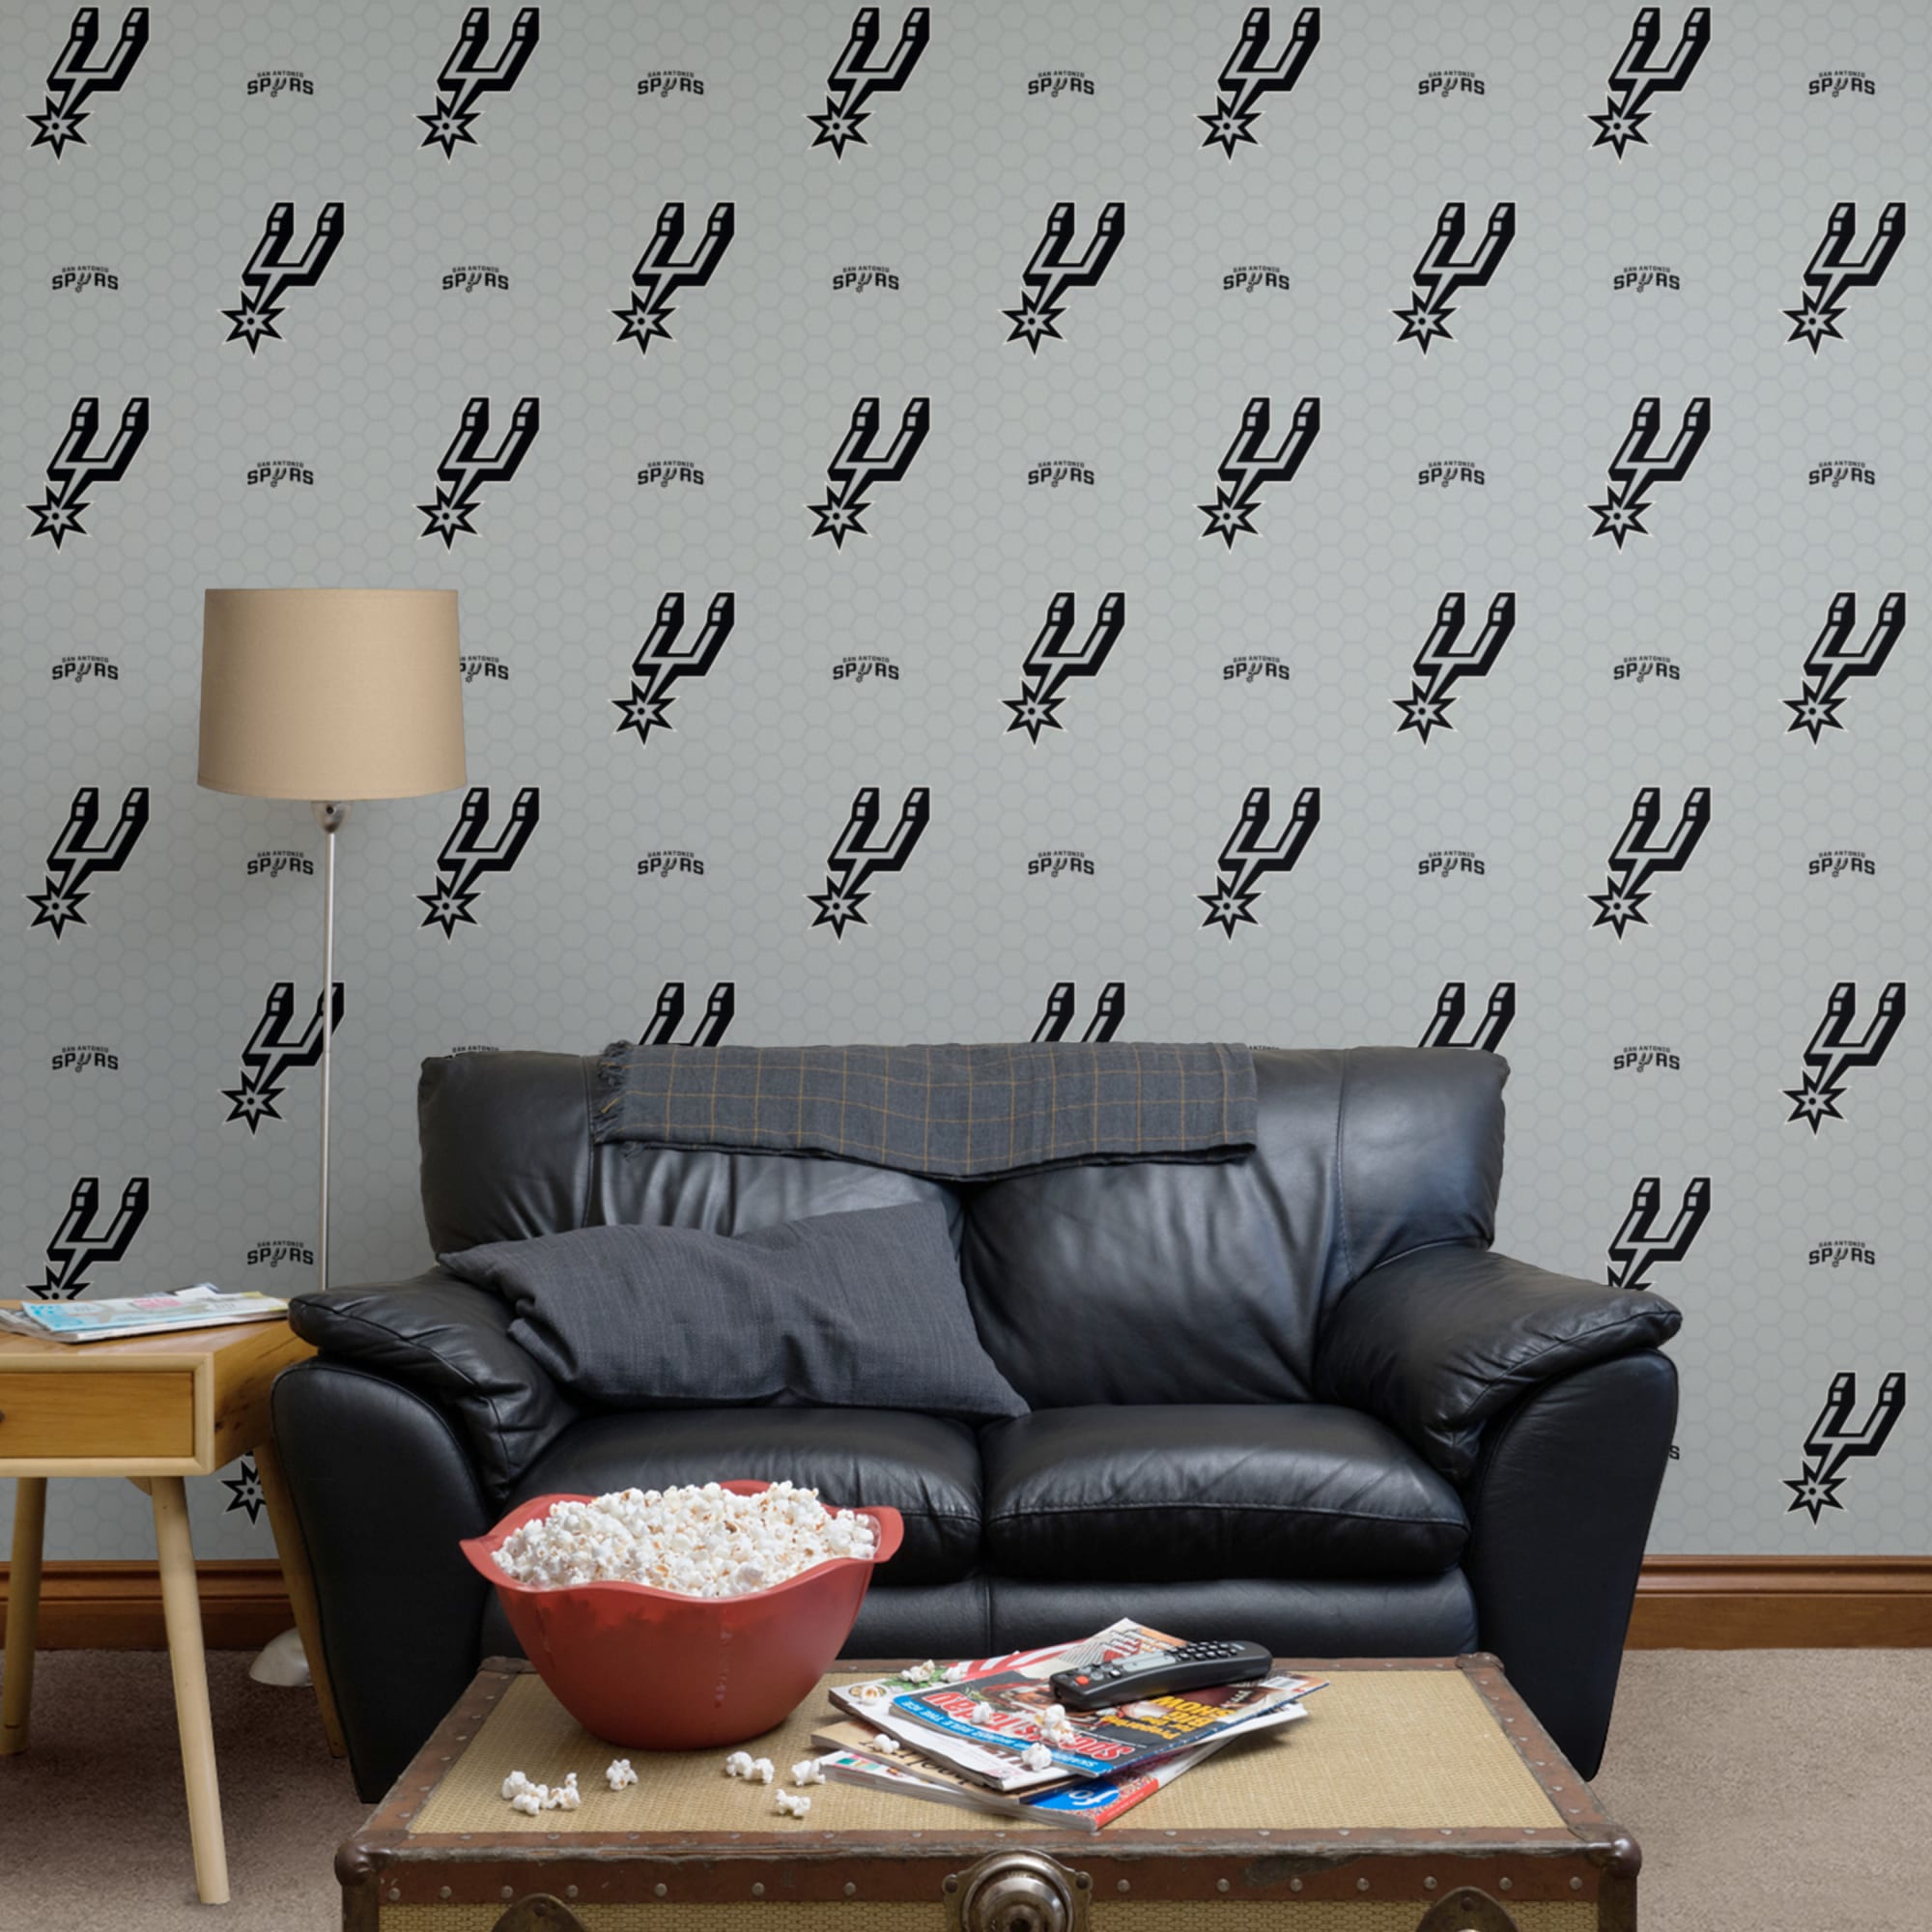 San Antonio Spurs: Logo Pattern - Officially Licensed Removable Wallpaper 12" x 12" Sample by Fathead